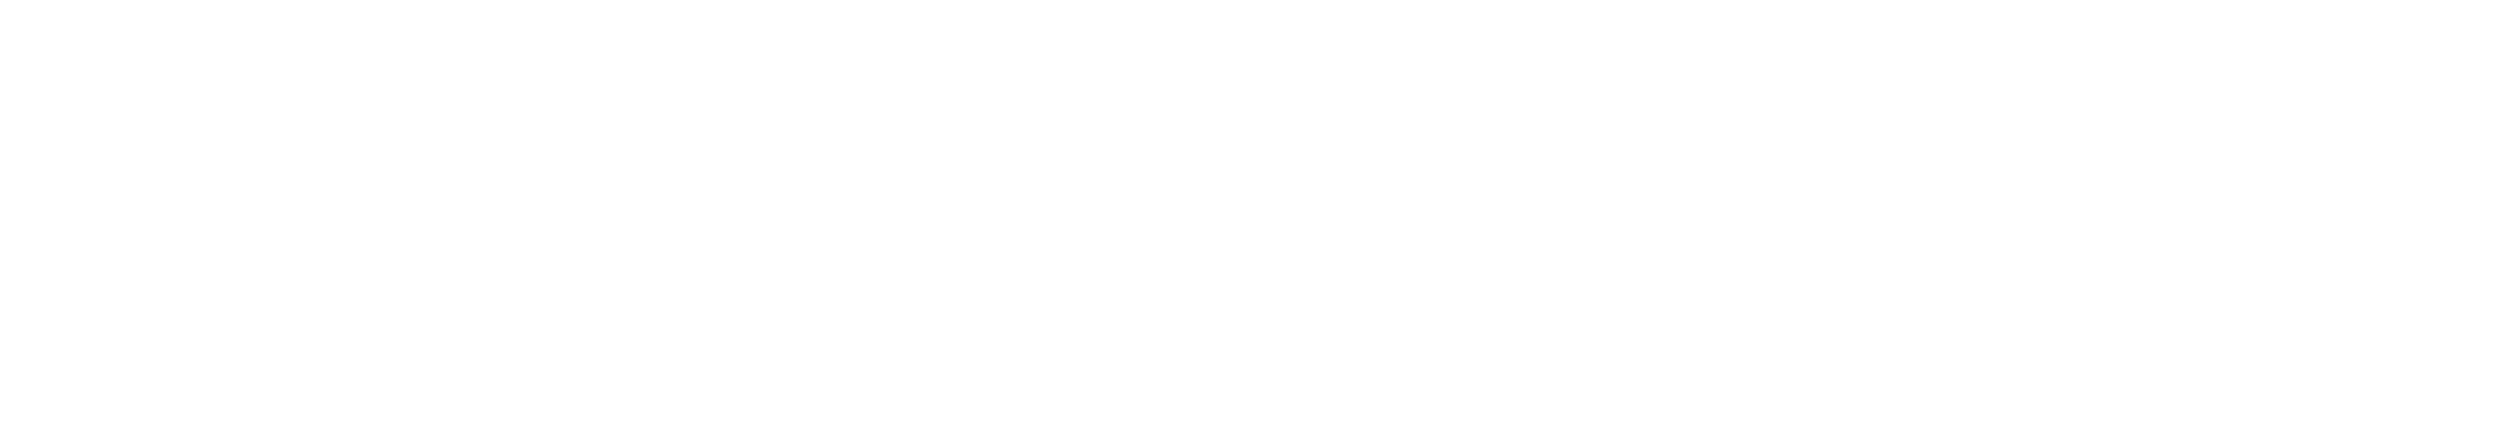 Accurate Staffing Consultants, Inc